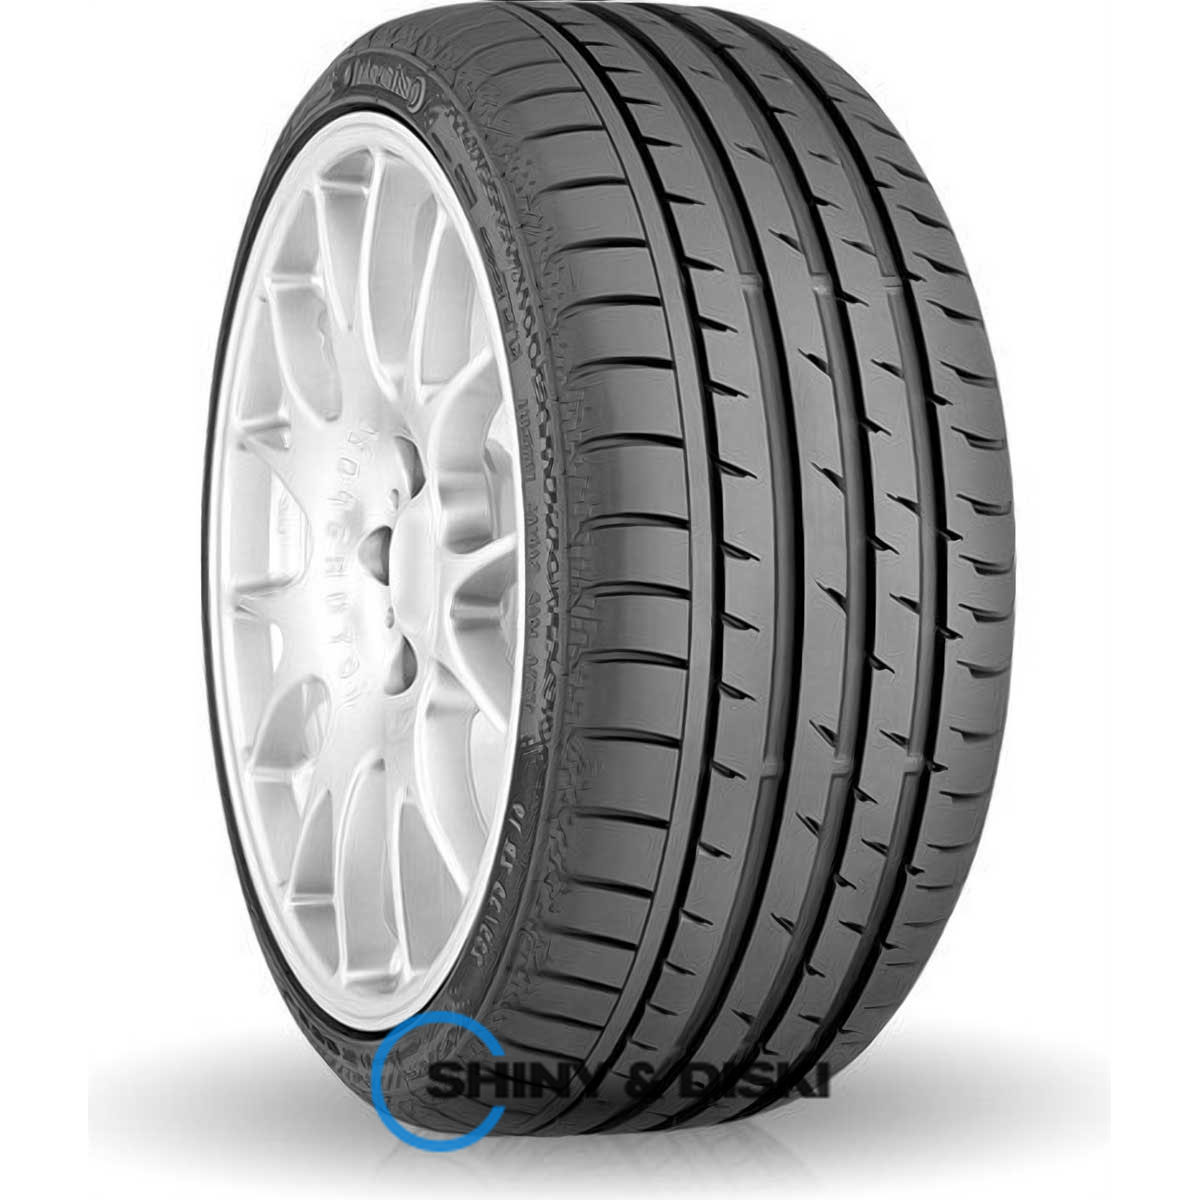 резина continental sportcontact 3 245/40 r18 93y mo fr